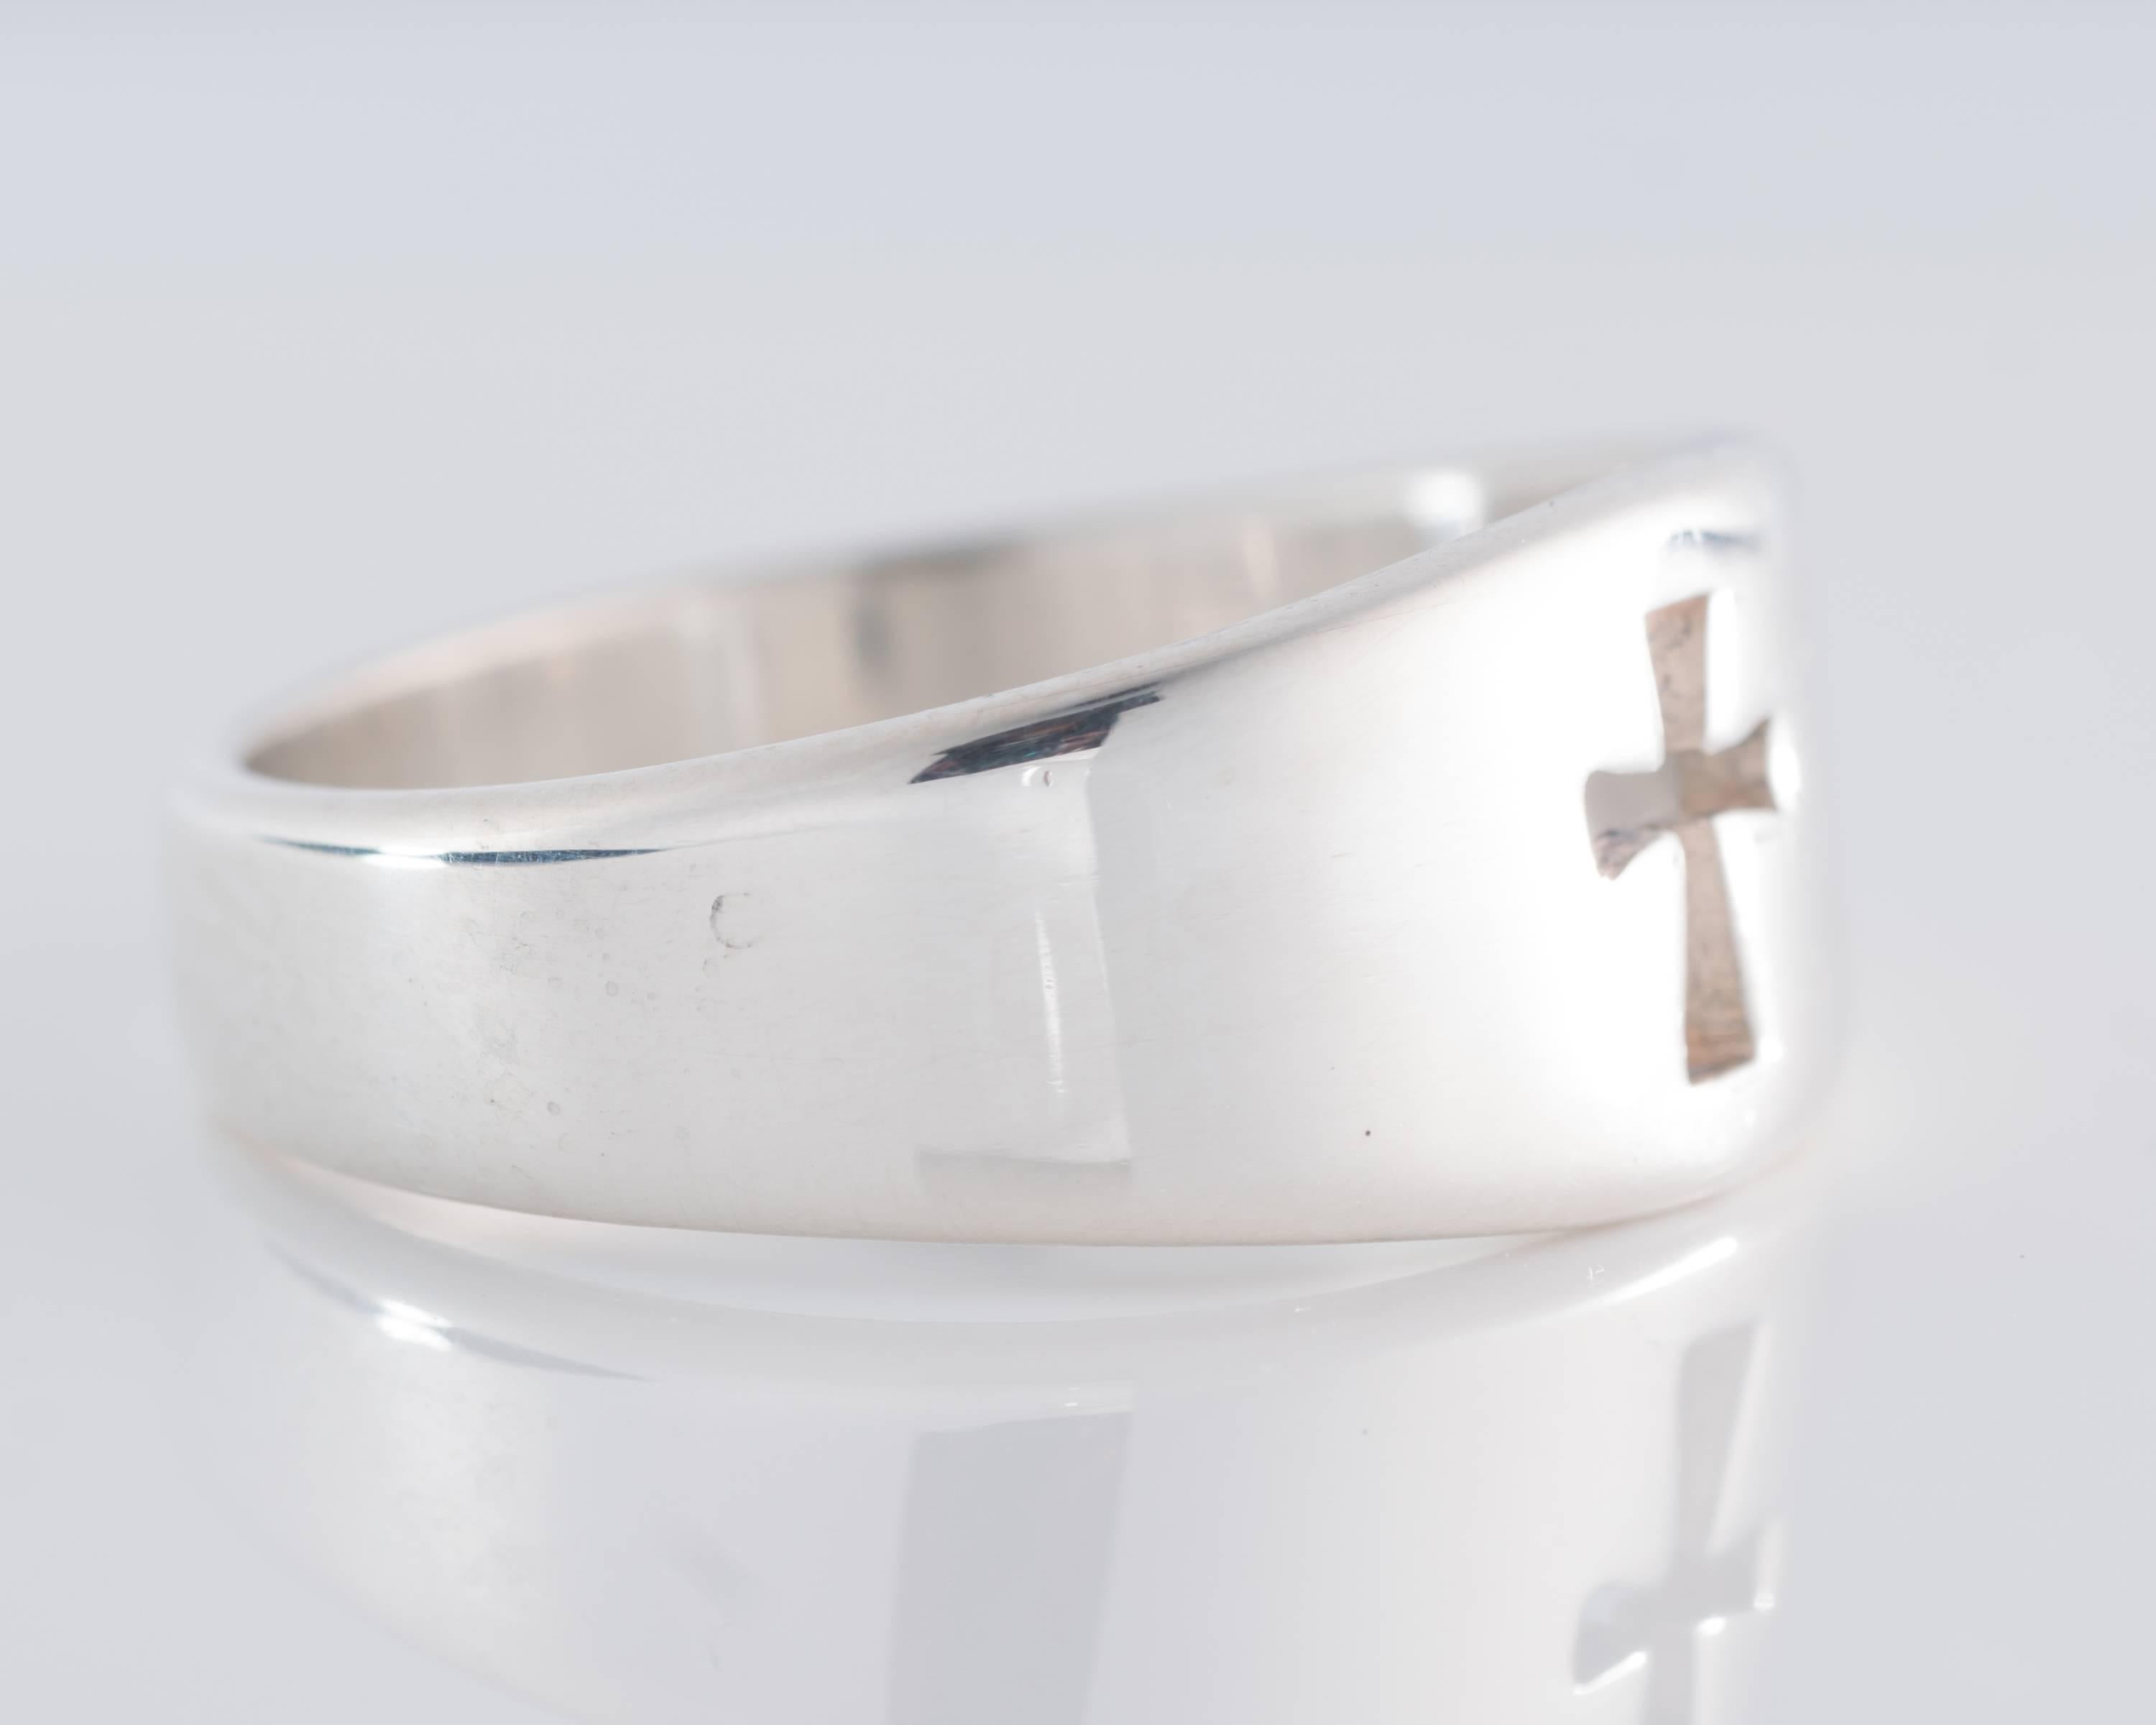 James Avery Crosslet Ring - Sterling Silver

Iconic All-American jewelry designer James Avery keeps things simple.
This beautifully designed and crafted band ring exemplifies his distinctive style. This ring is crafted from high polish, shiny